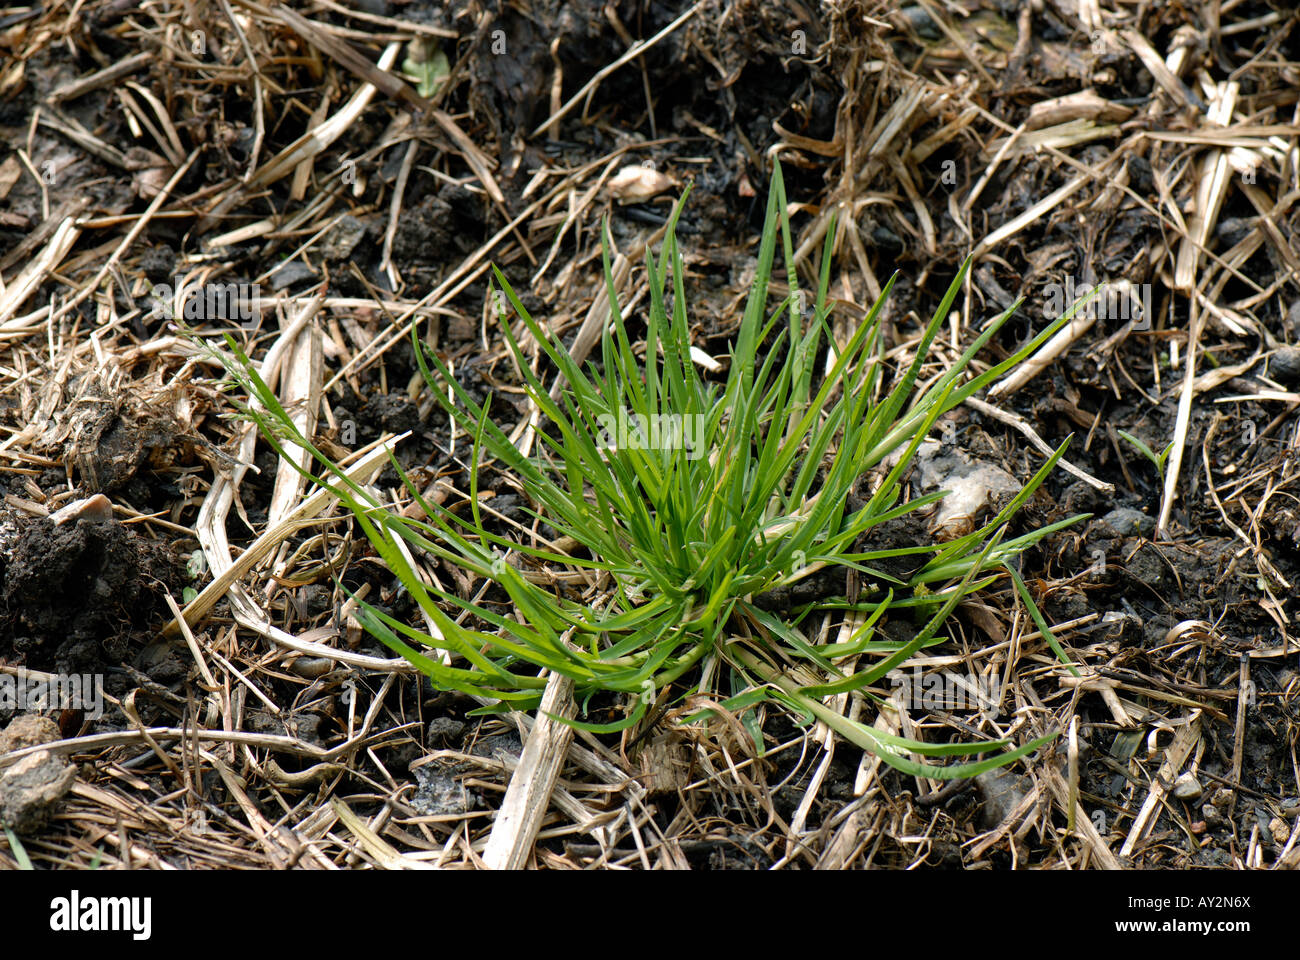 Annual meadow grass Poa annua plant just beginning to flower Stock Photo